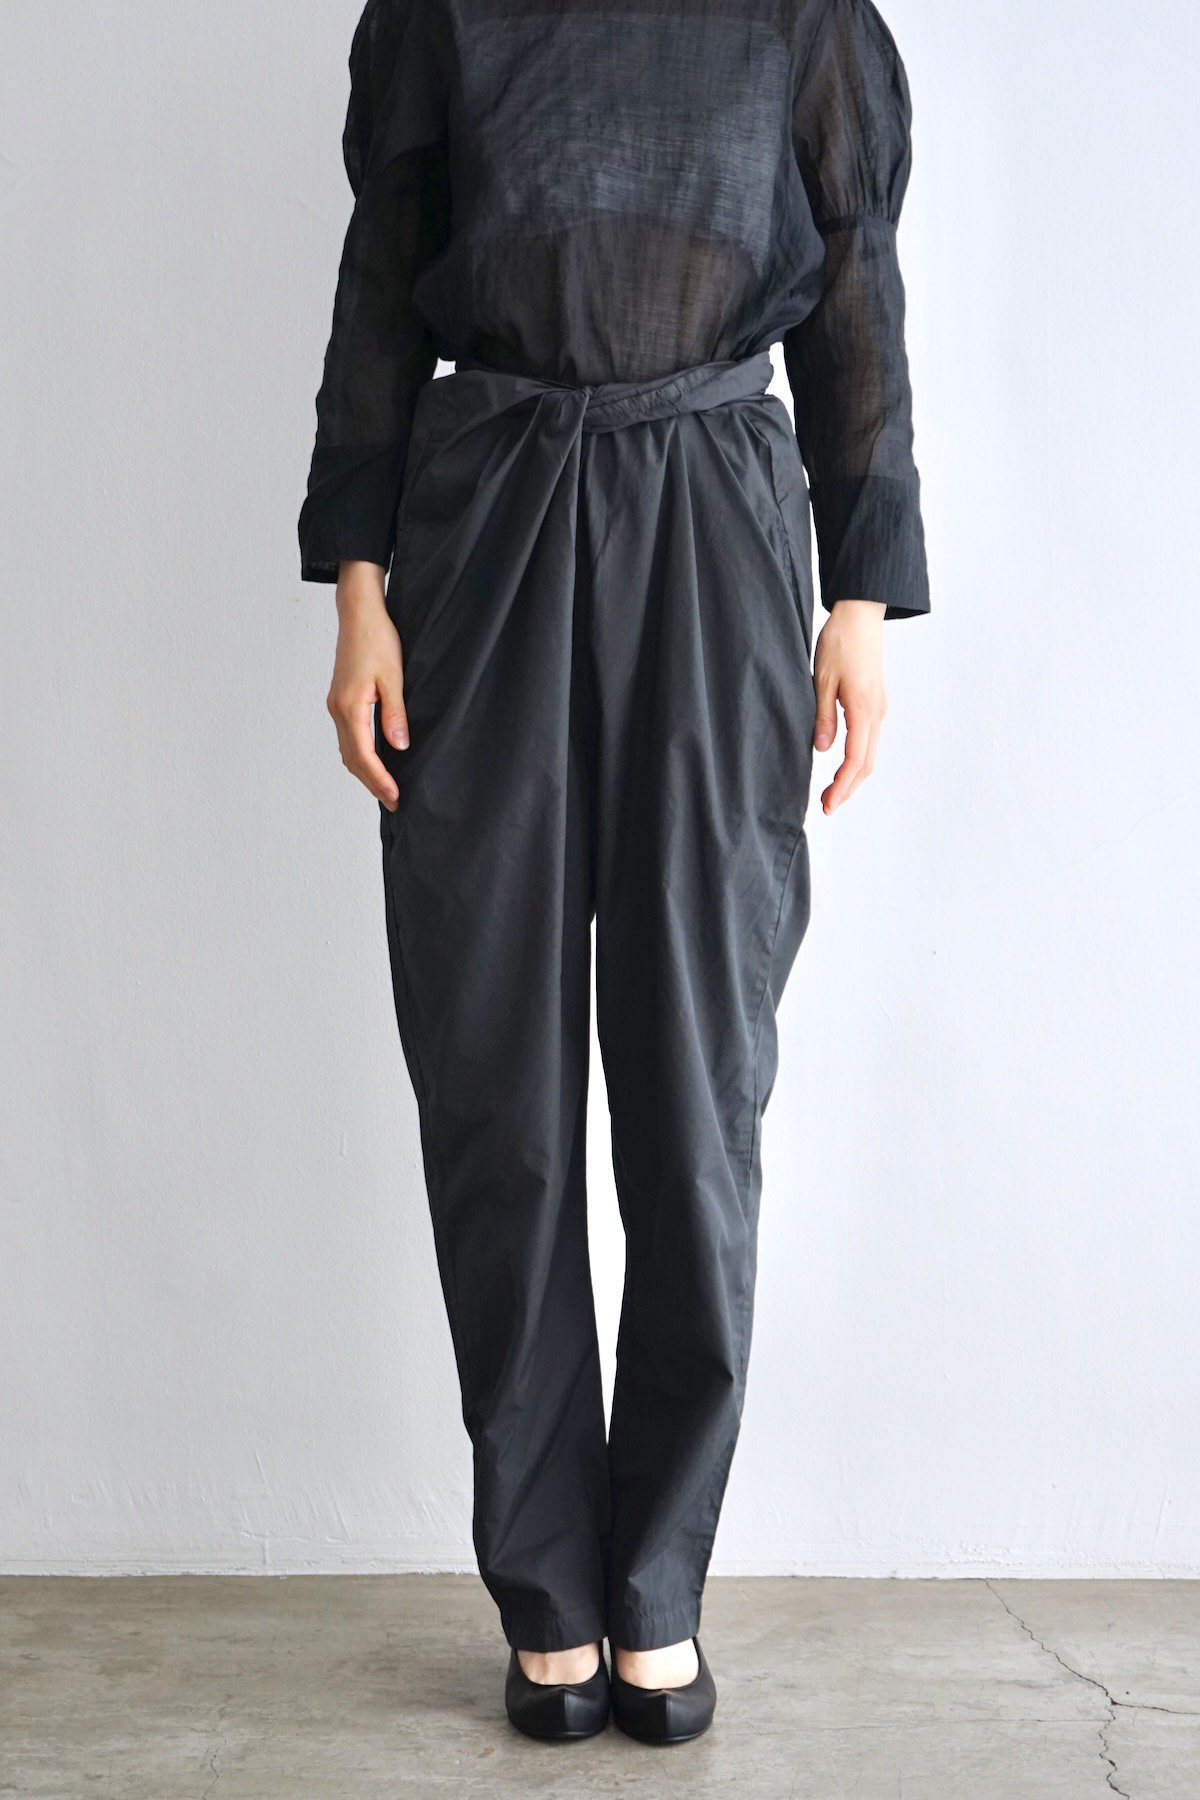 COSMIC WONDER / Suvin cotton broadcloth wrapped pants  /  Sandalwood charcoal